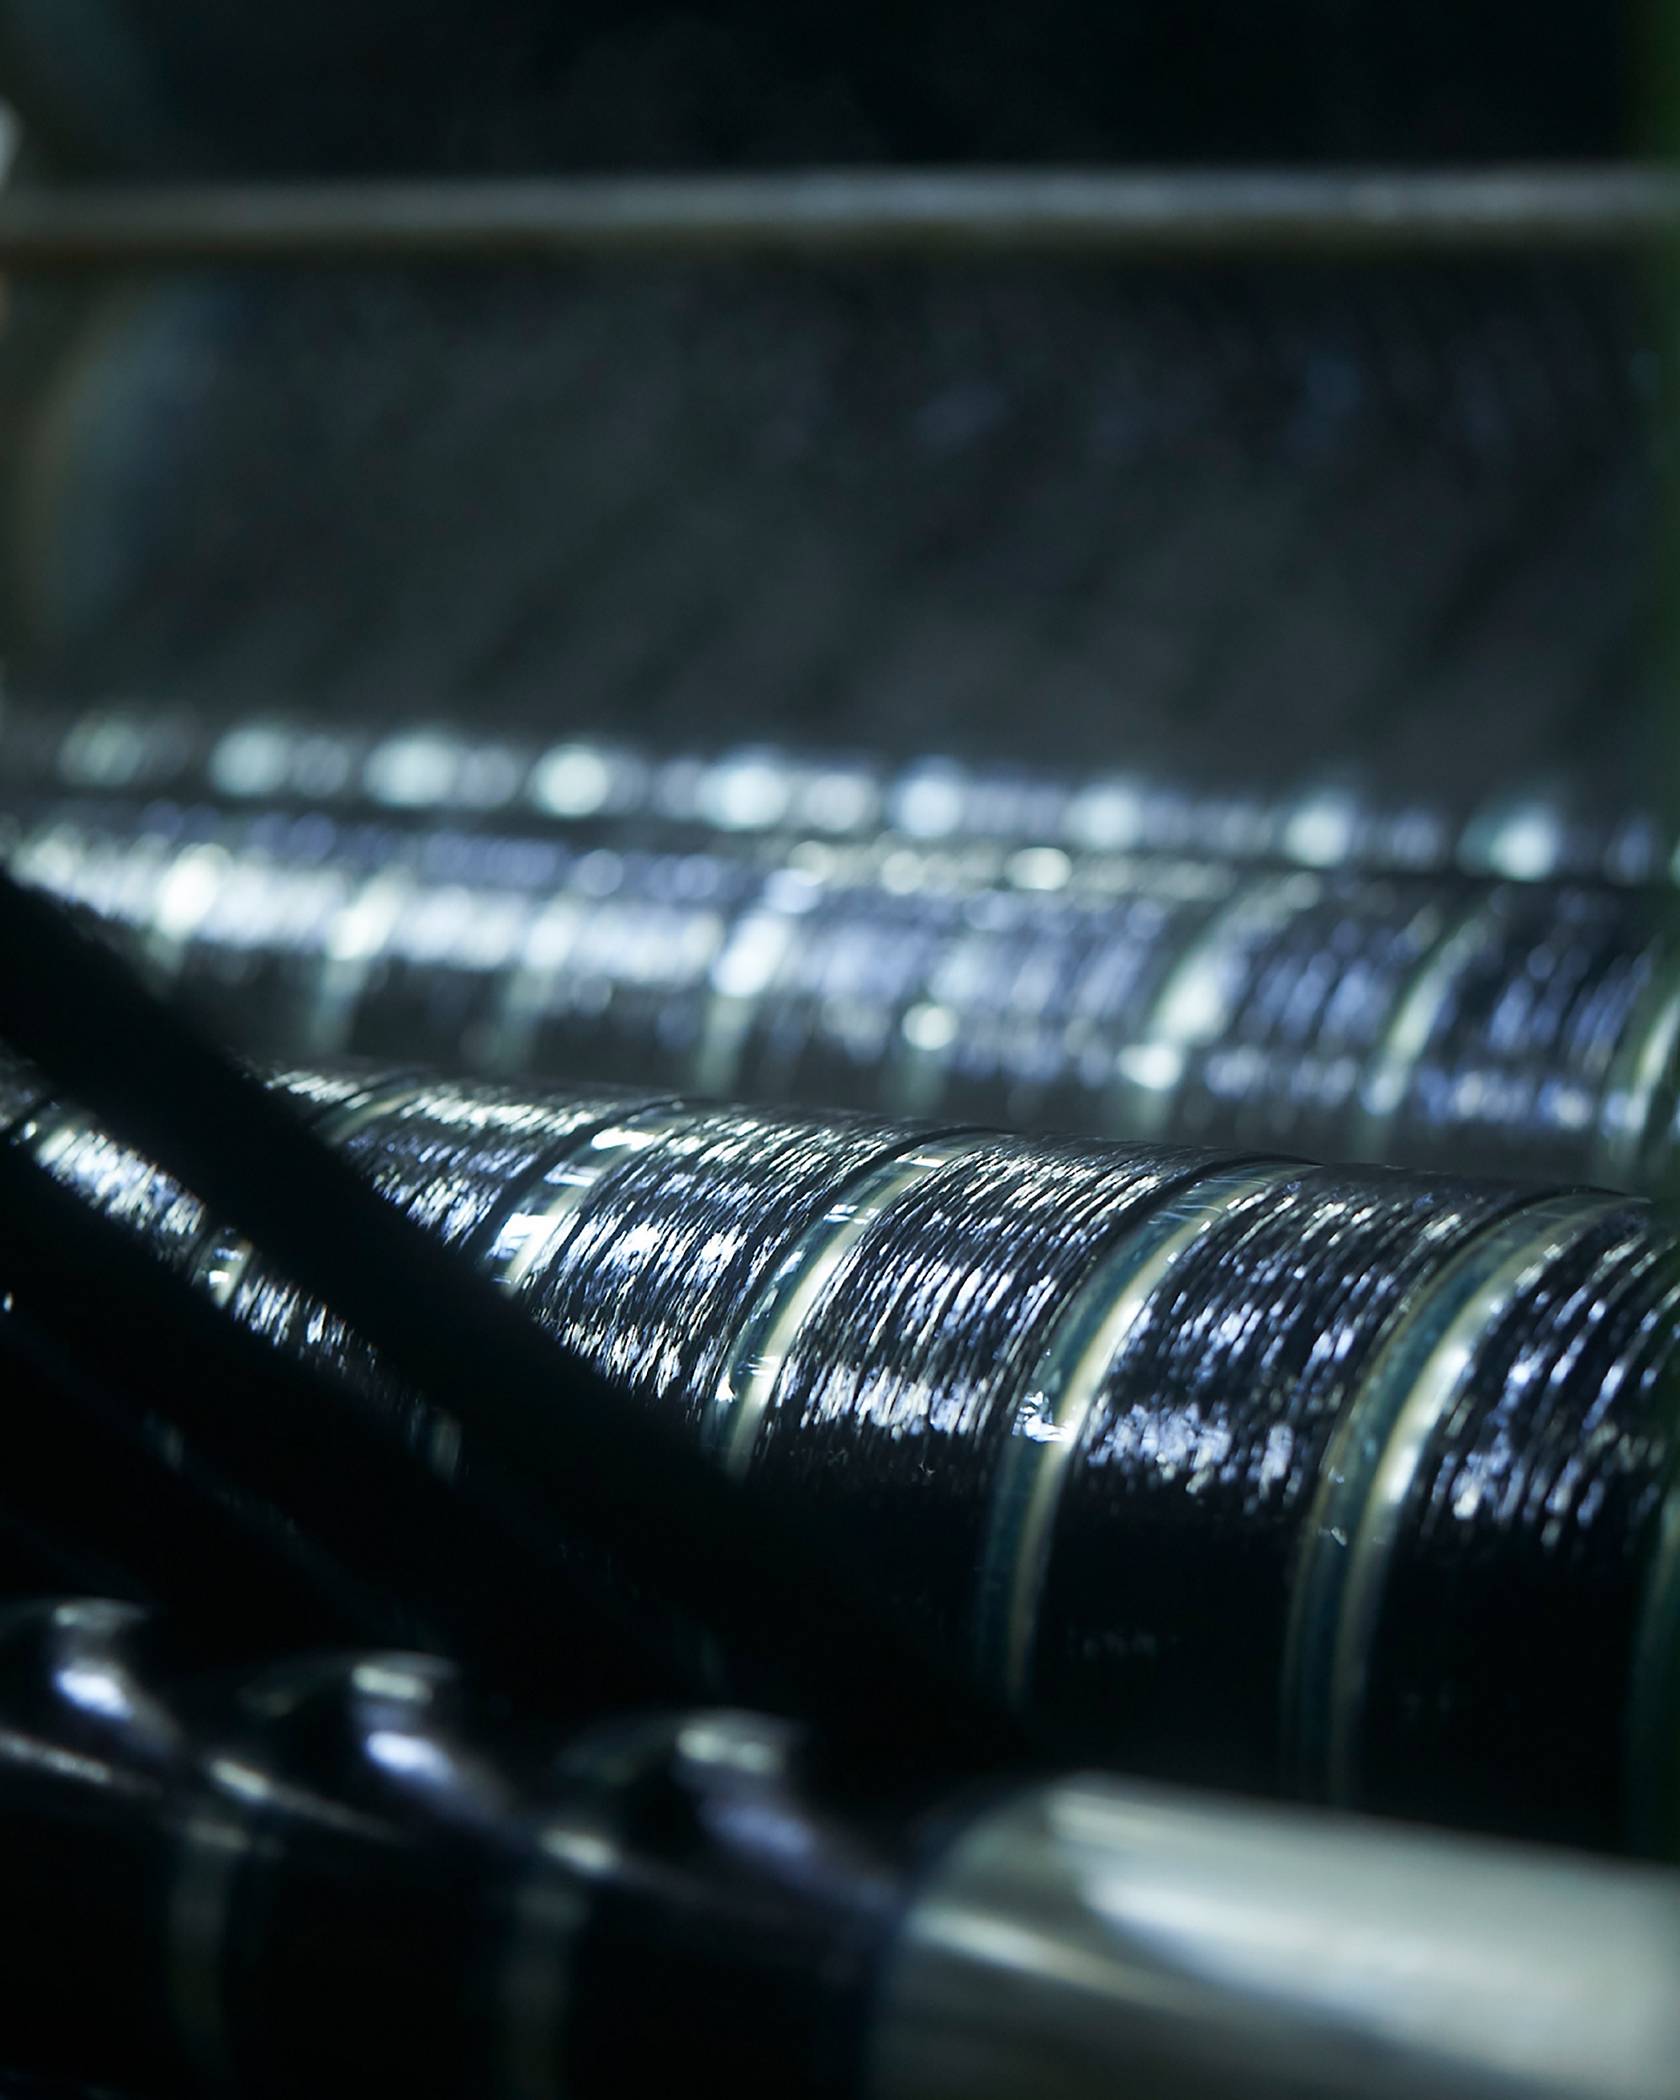 Kaihara’s manufacture process close up image of with their manufacture of handwoven indigo-dyed kasuri textile.